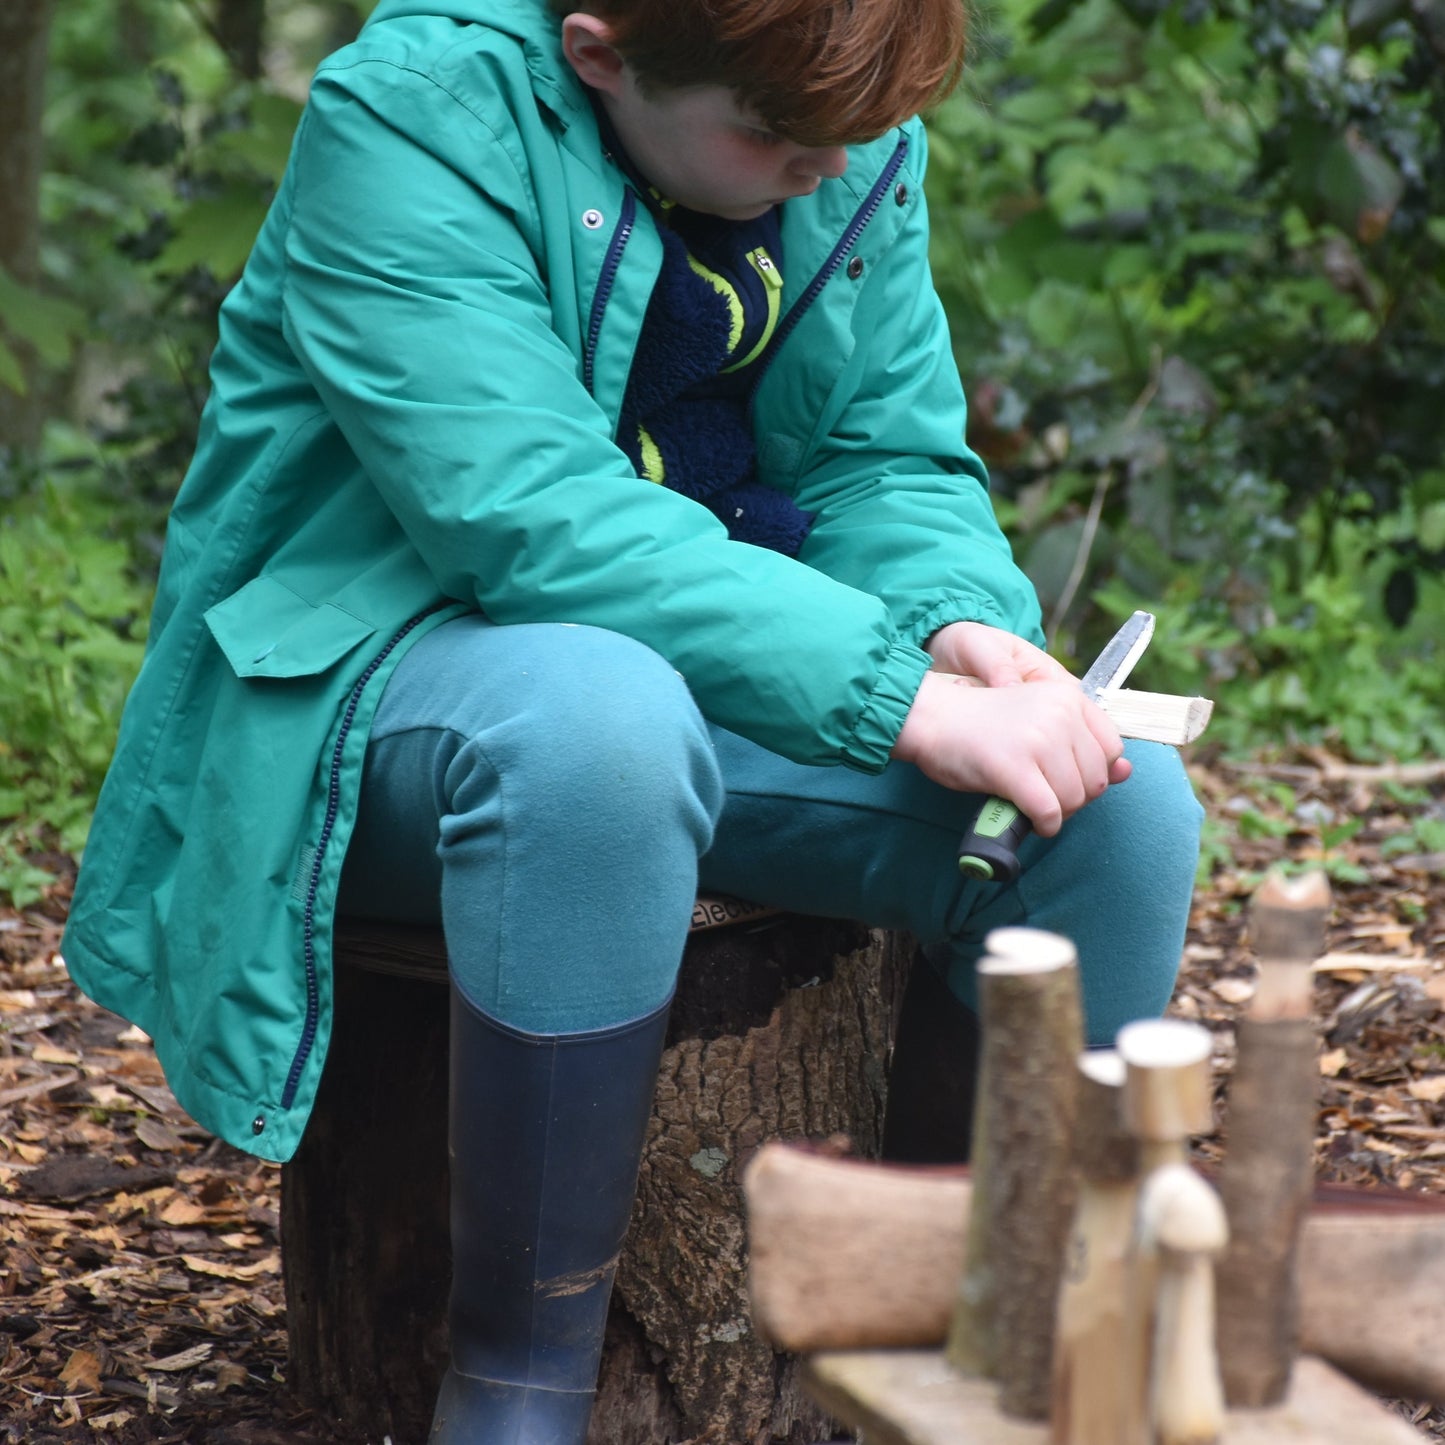 Bushcraft Whittling: Tent Pegs, Mallets, Try Sticks - 16.06.24 (AM)